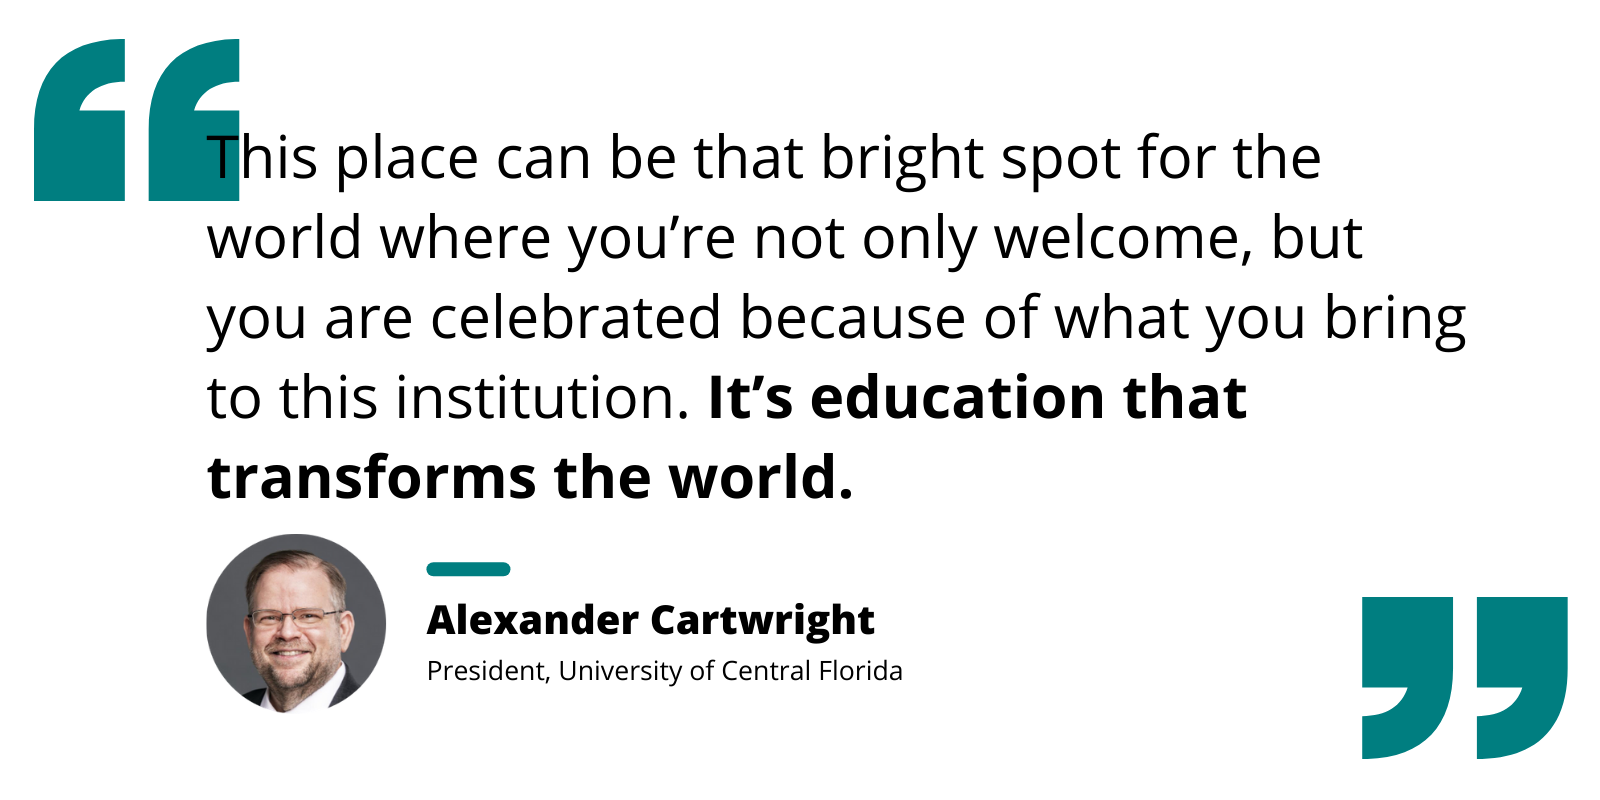 Quote by Alexander Cartwright re: schools celebrating students for what they bring, and education transforming the world.